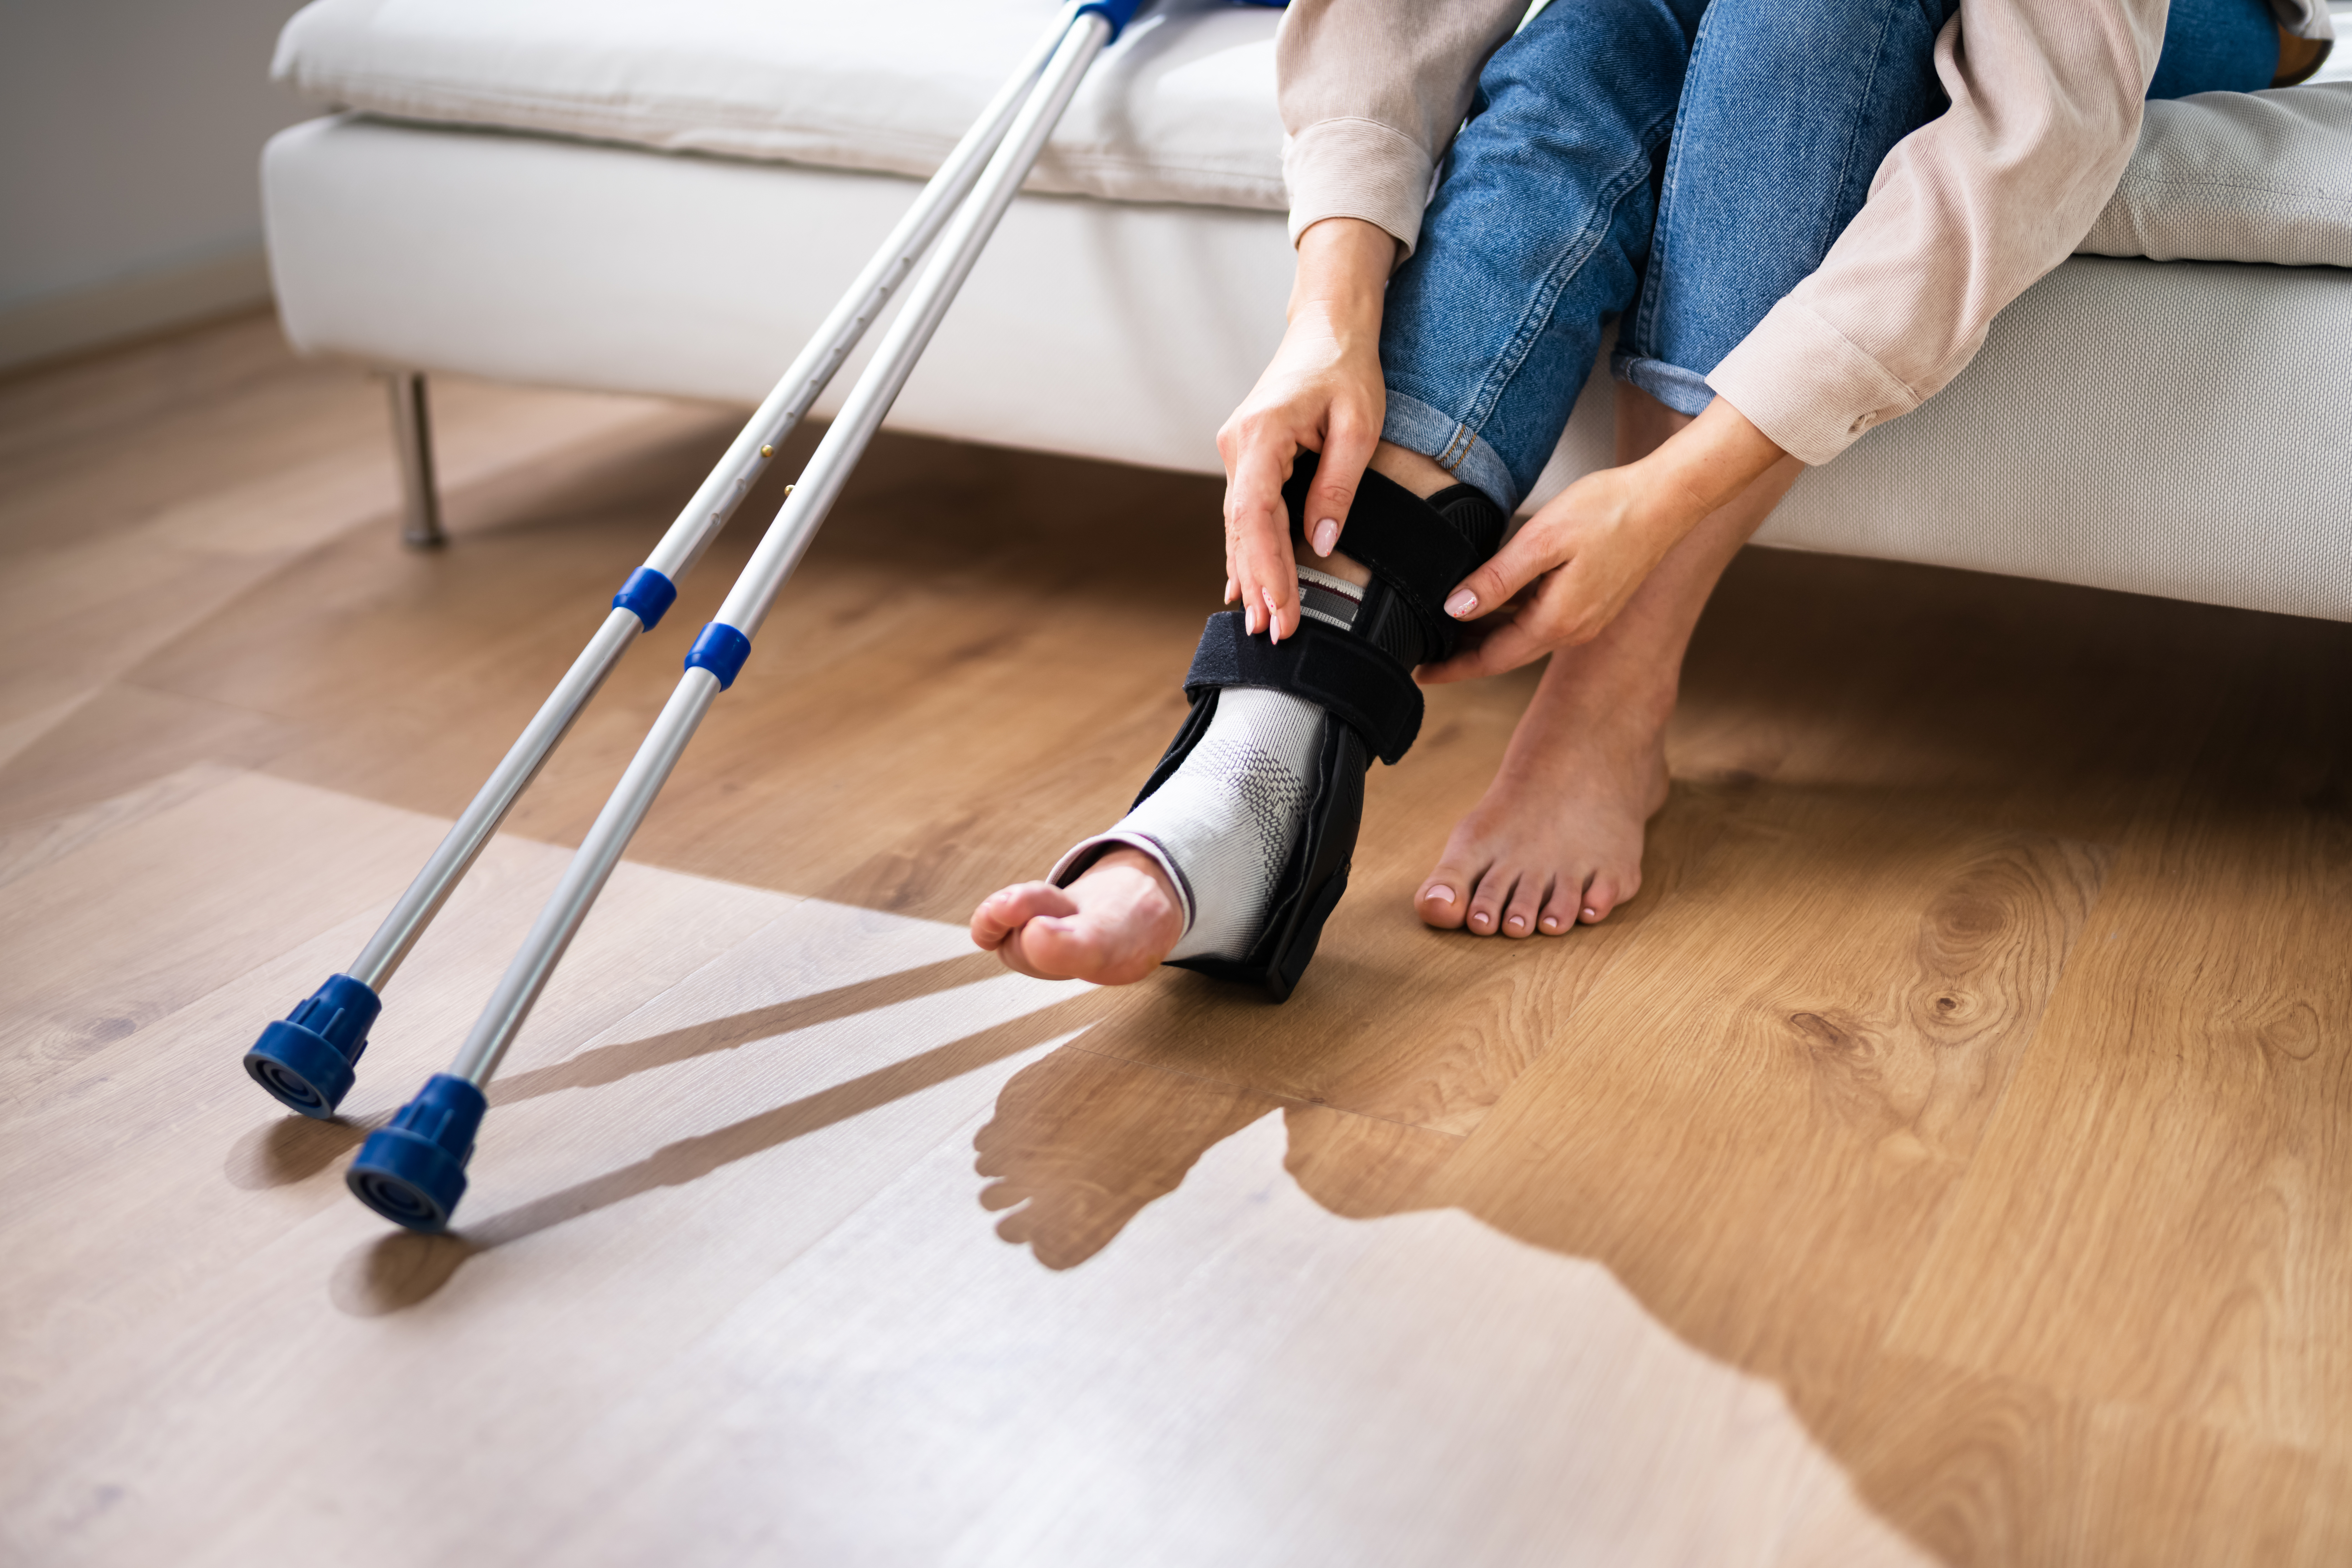 How Long Does a Fractured Ankle Take to Heal?